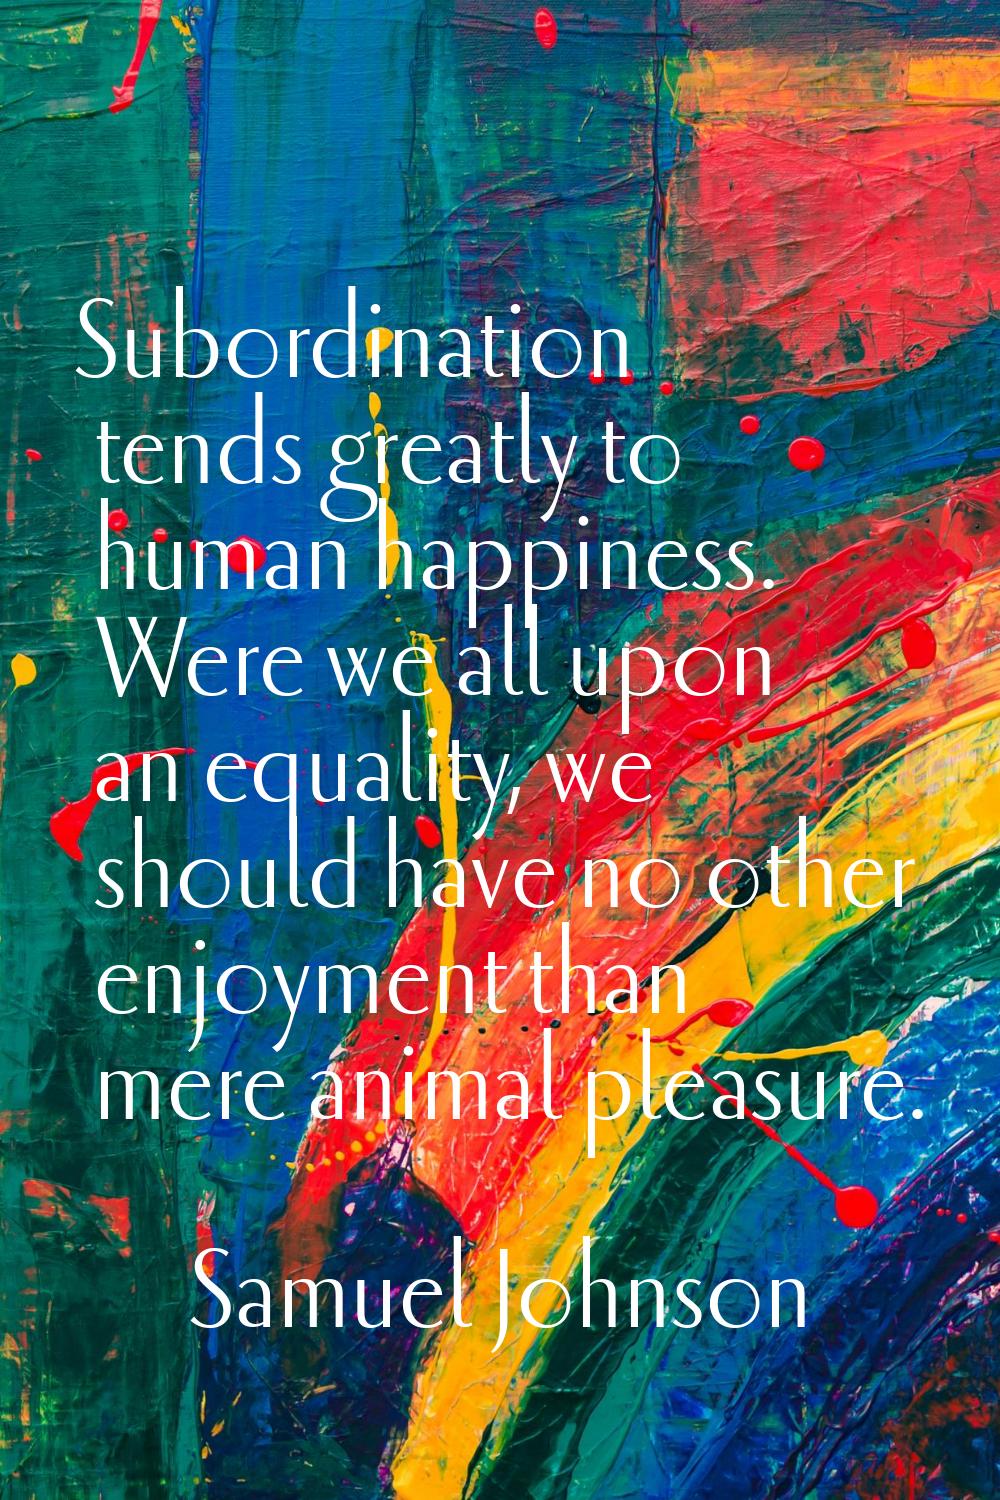 Subordination tends greatly to human happiness. Were we all upon an equality, we should have no oth